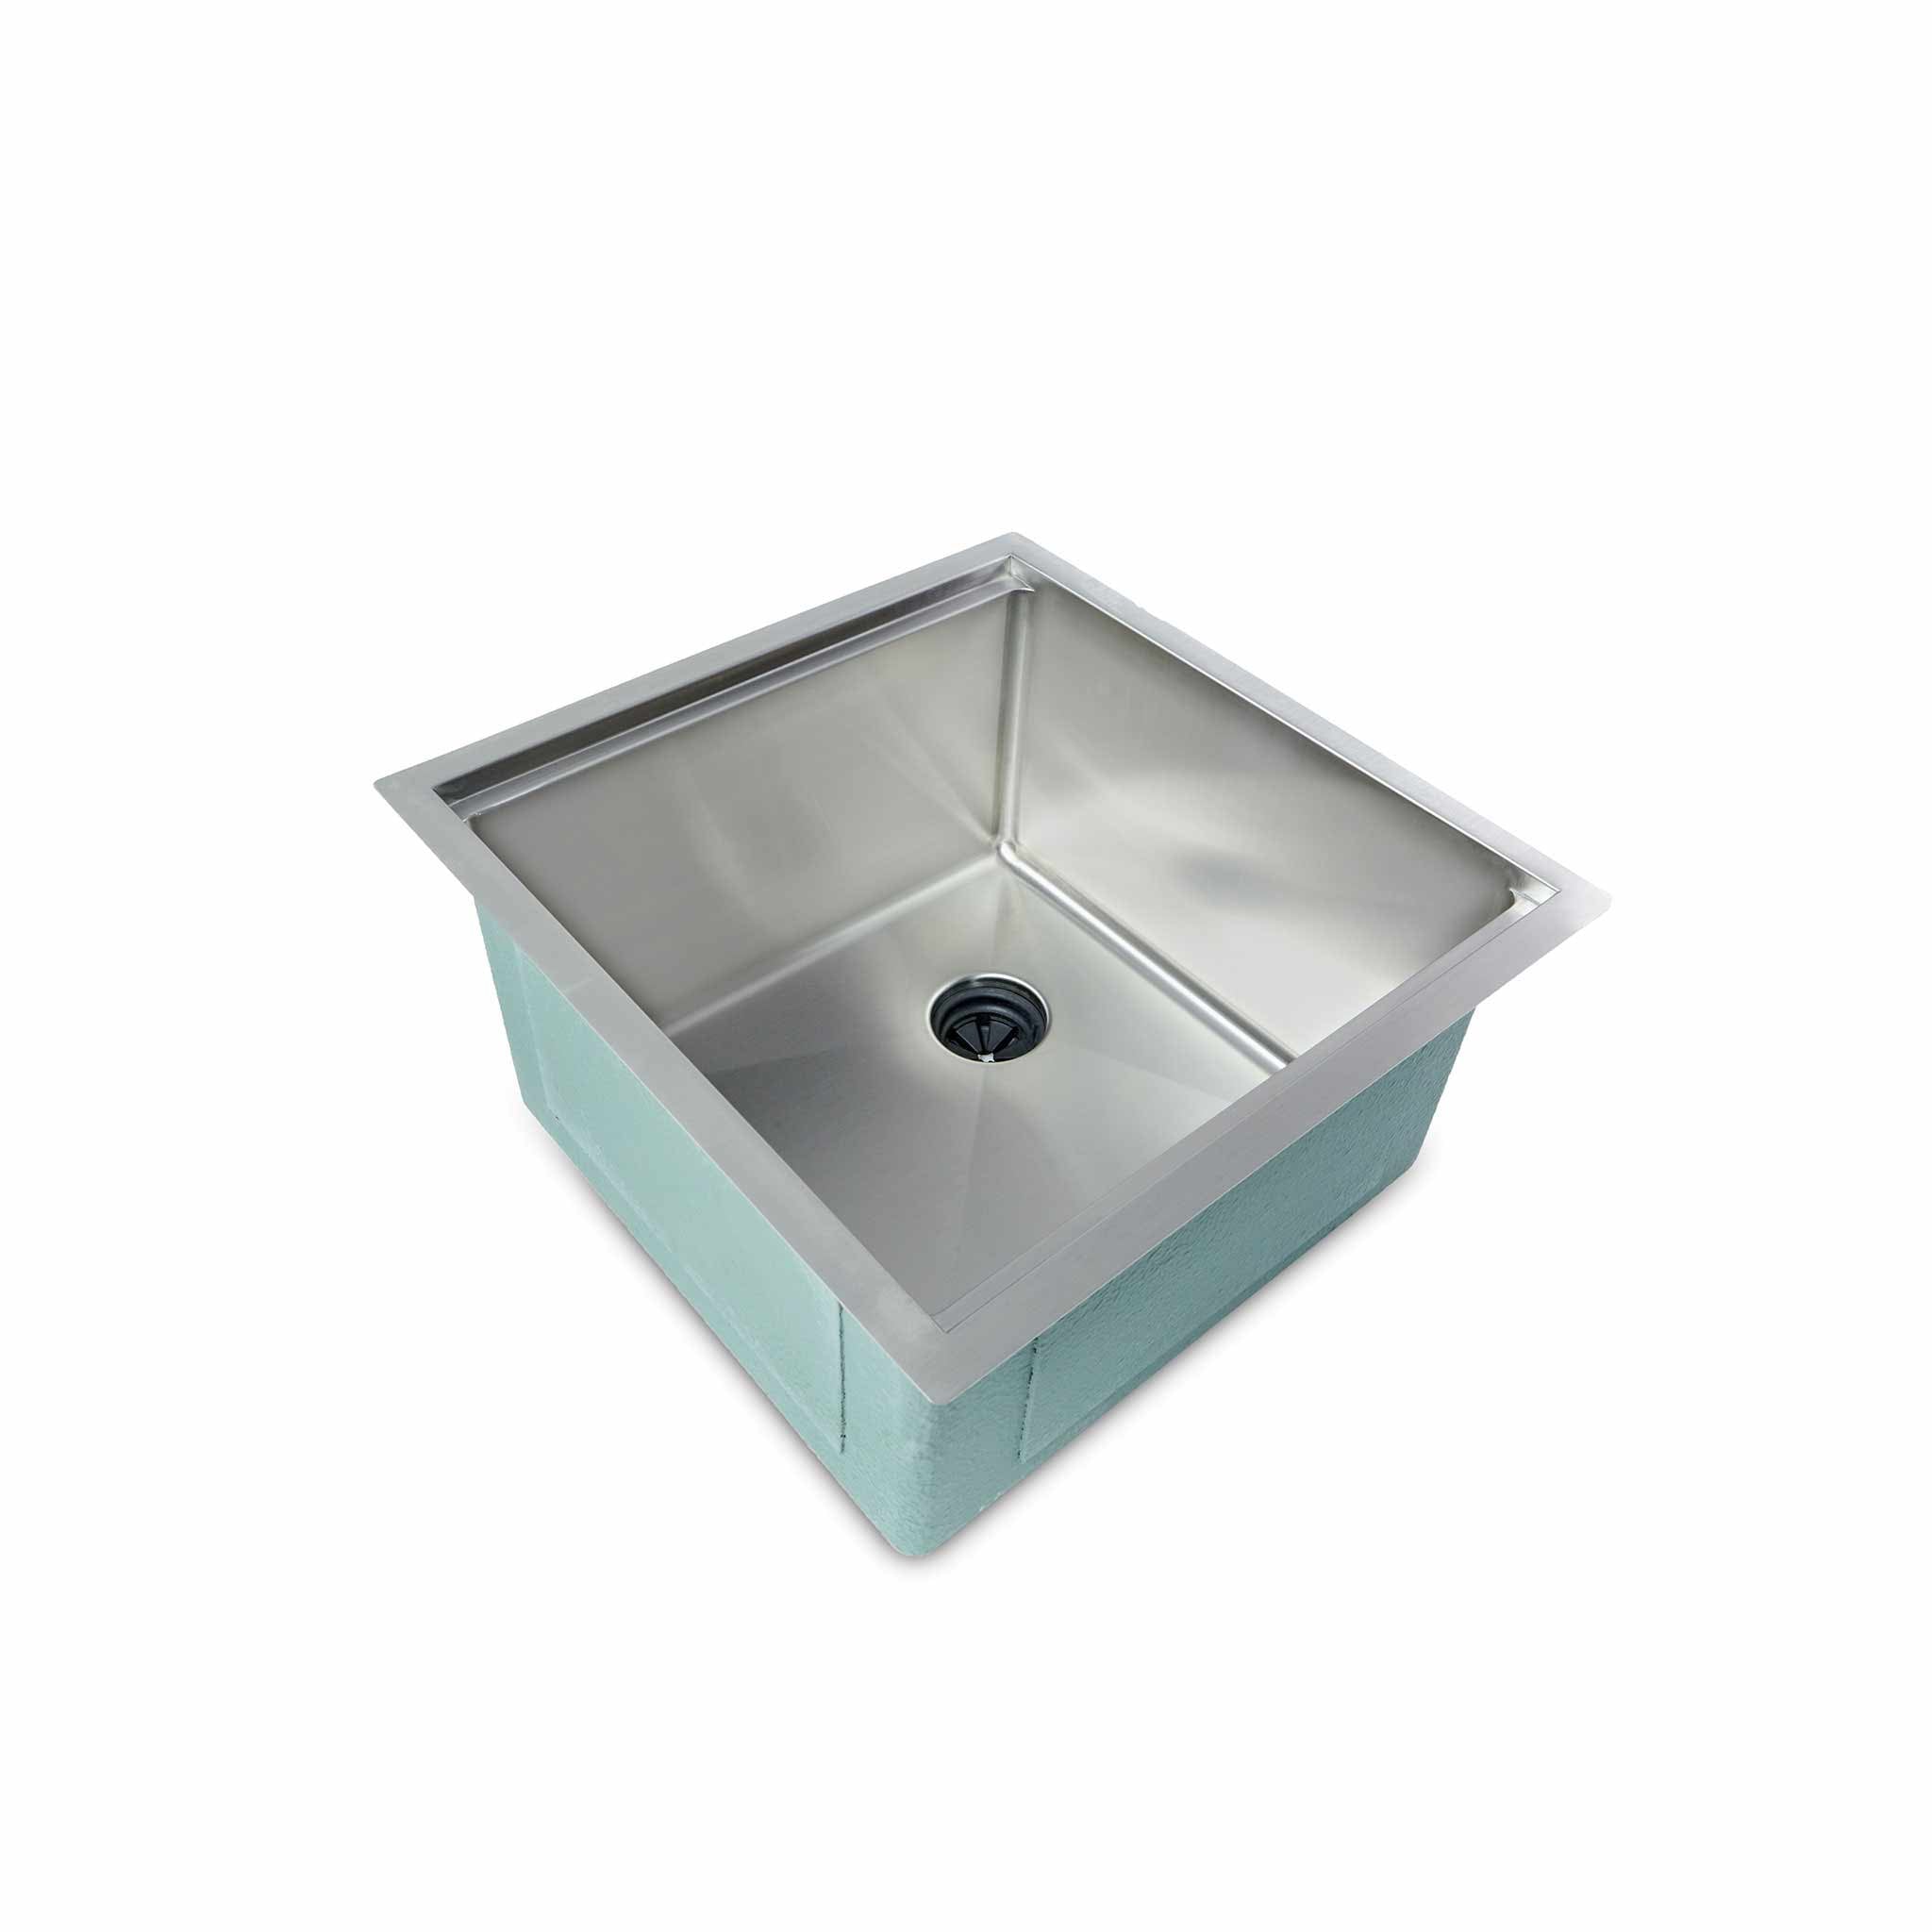 19”, workstation sink for home bar or prep area with a right, offset drain, seamless drain design and half inch radius, easy-clean corners.